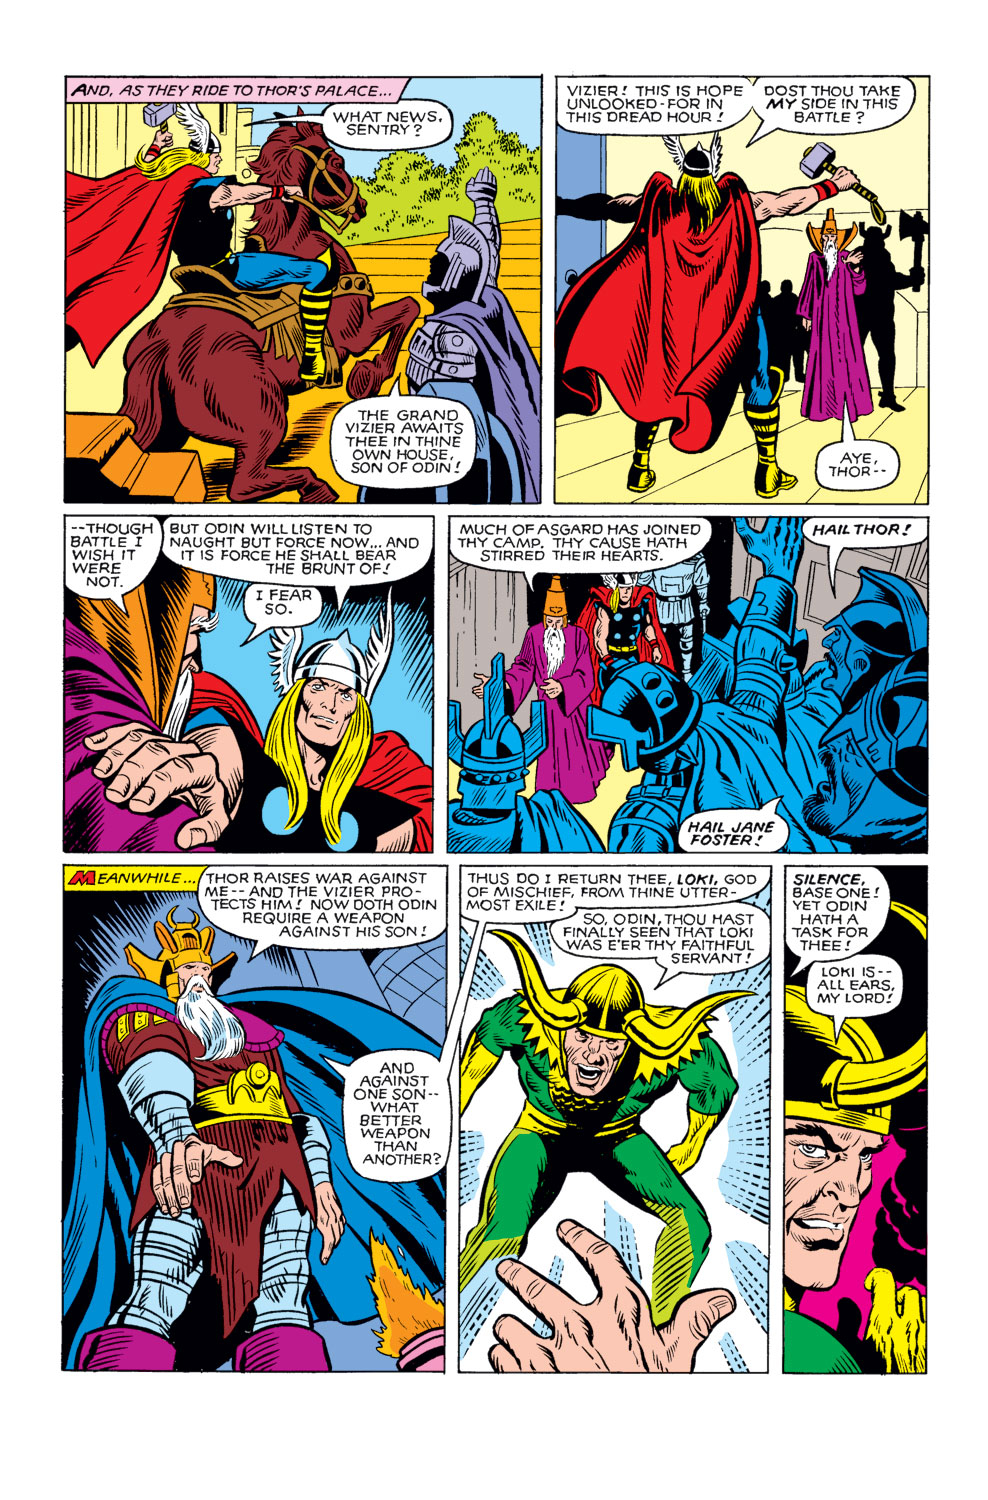 What If? (1977) issue 25 - Thor and the Avengers battled the gods - Page 10